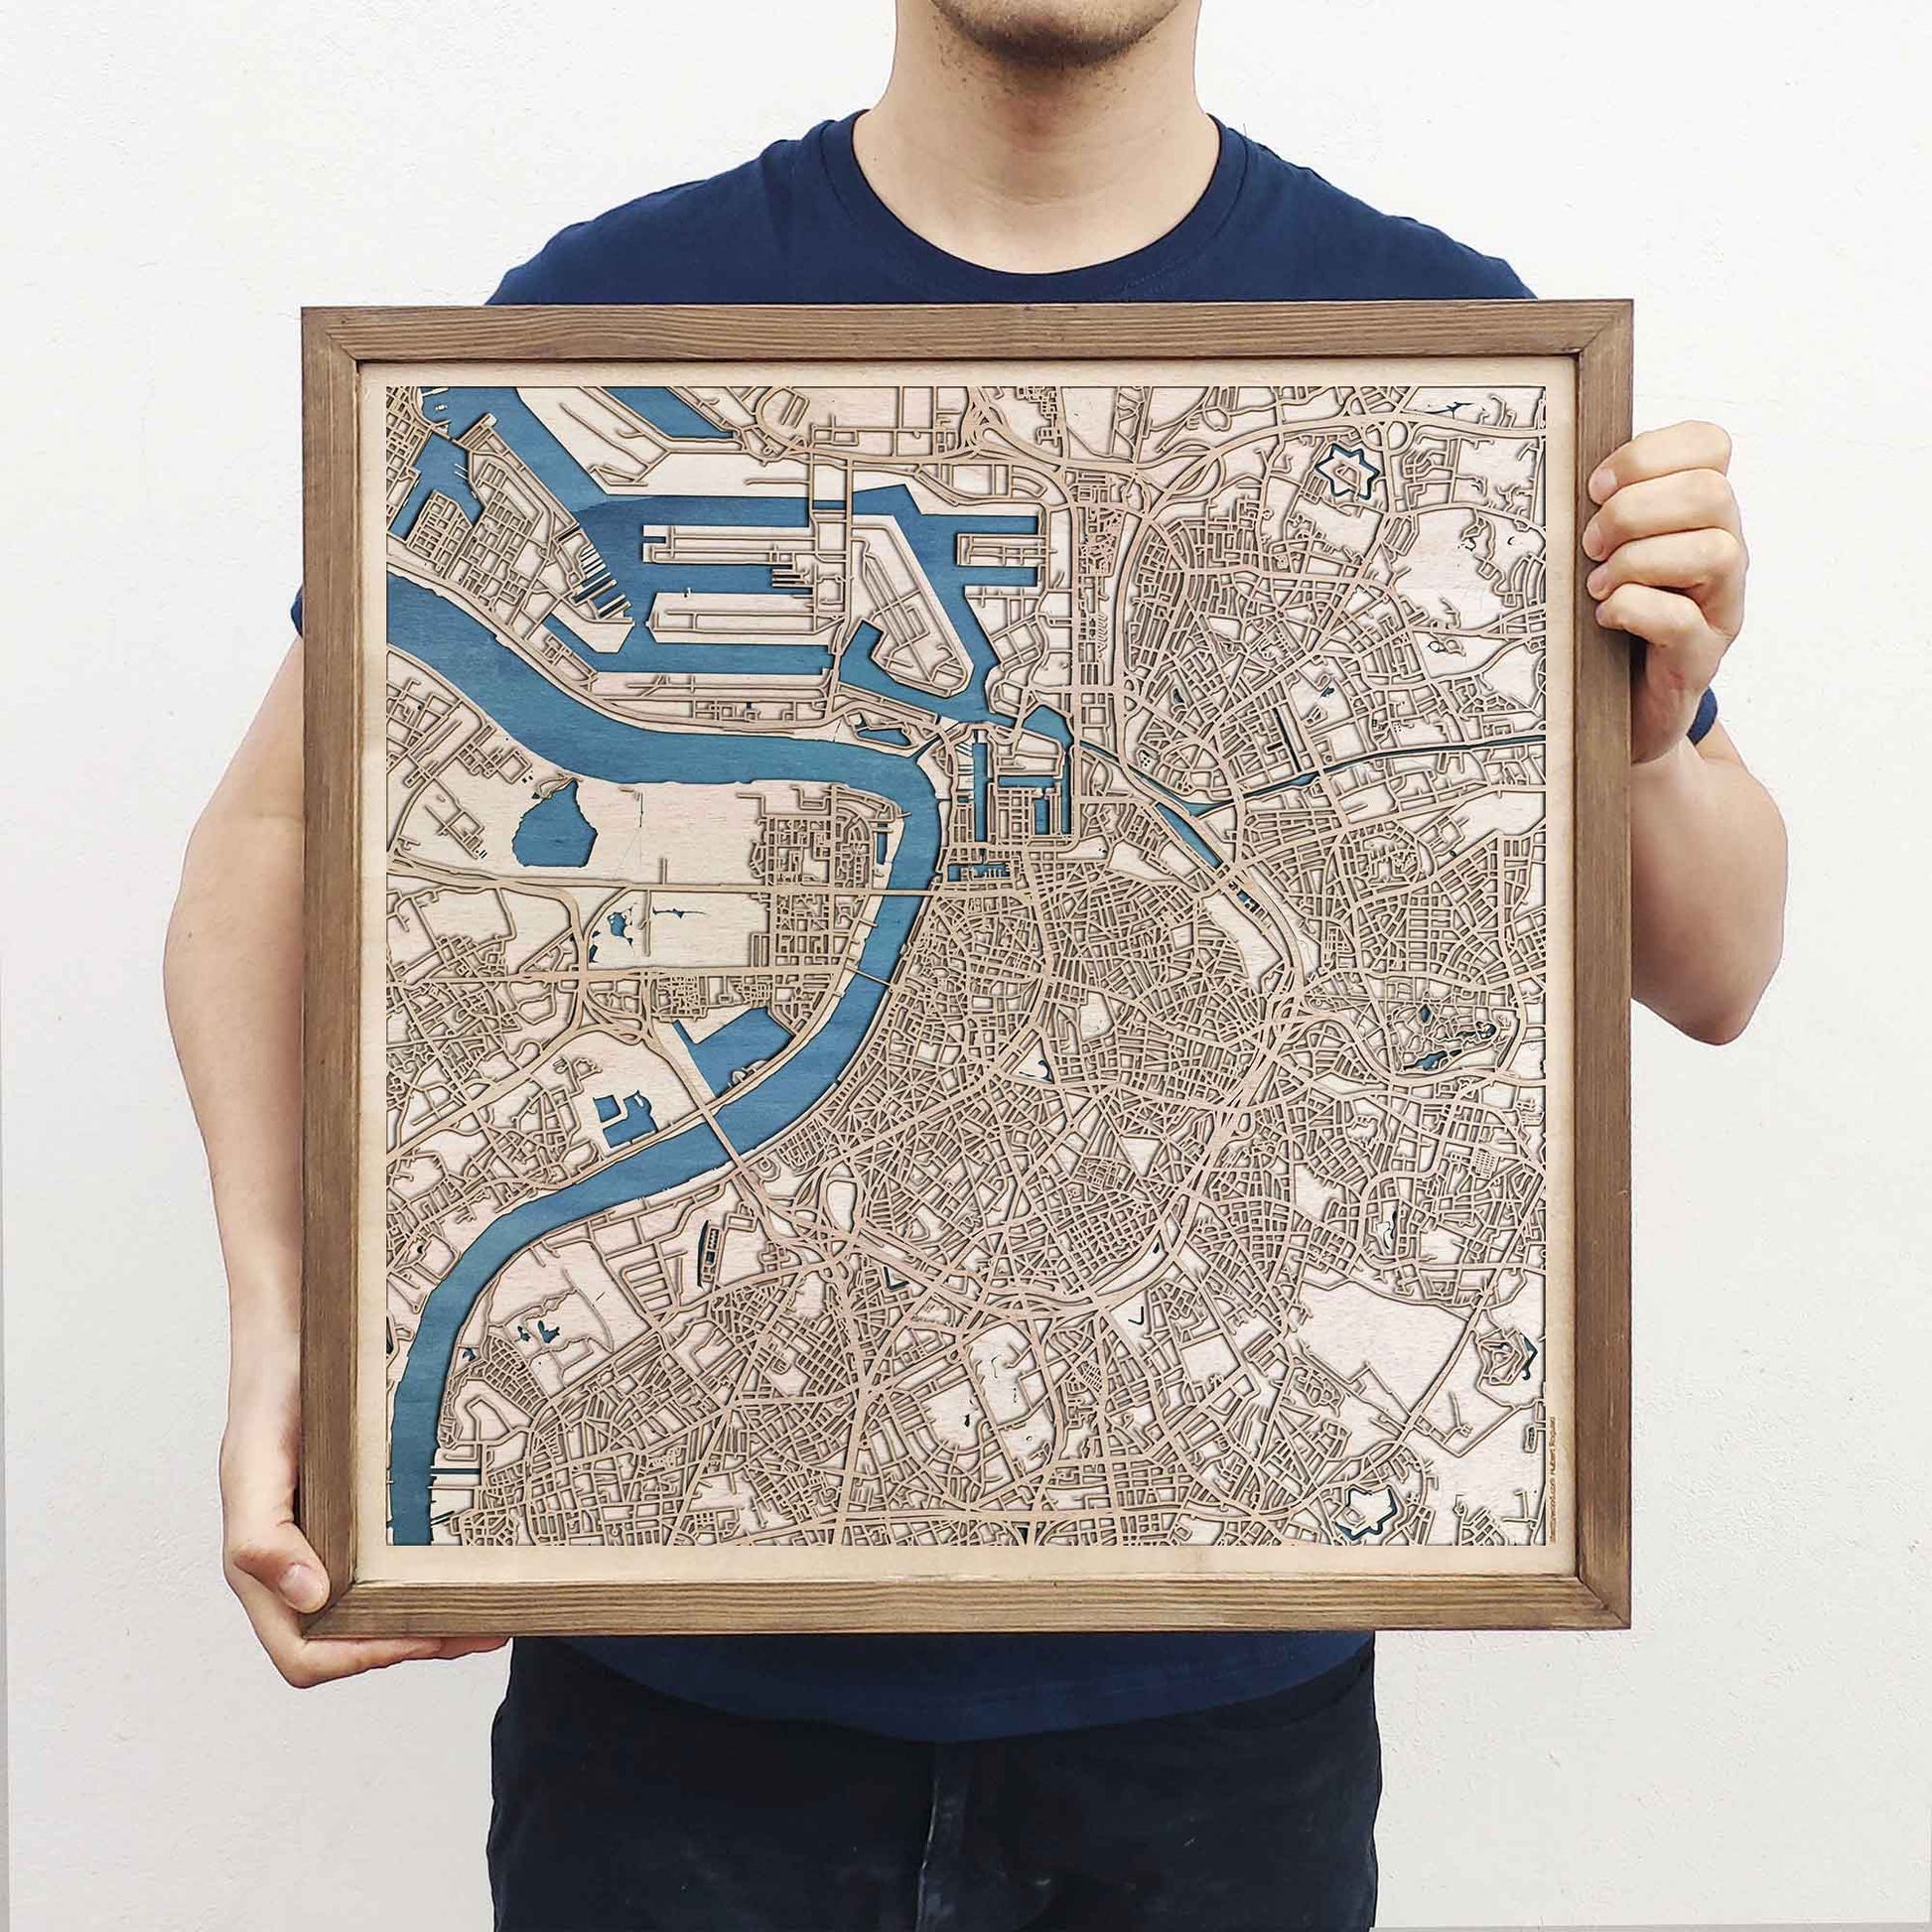 Antwerp Wooden Map by CityWood - Custom Wood Map Art - Unique Laser Cut Engraved - Anniversary Gift